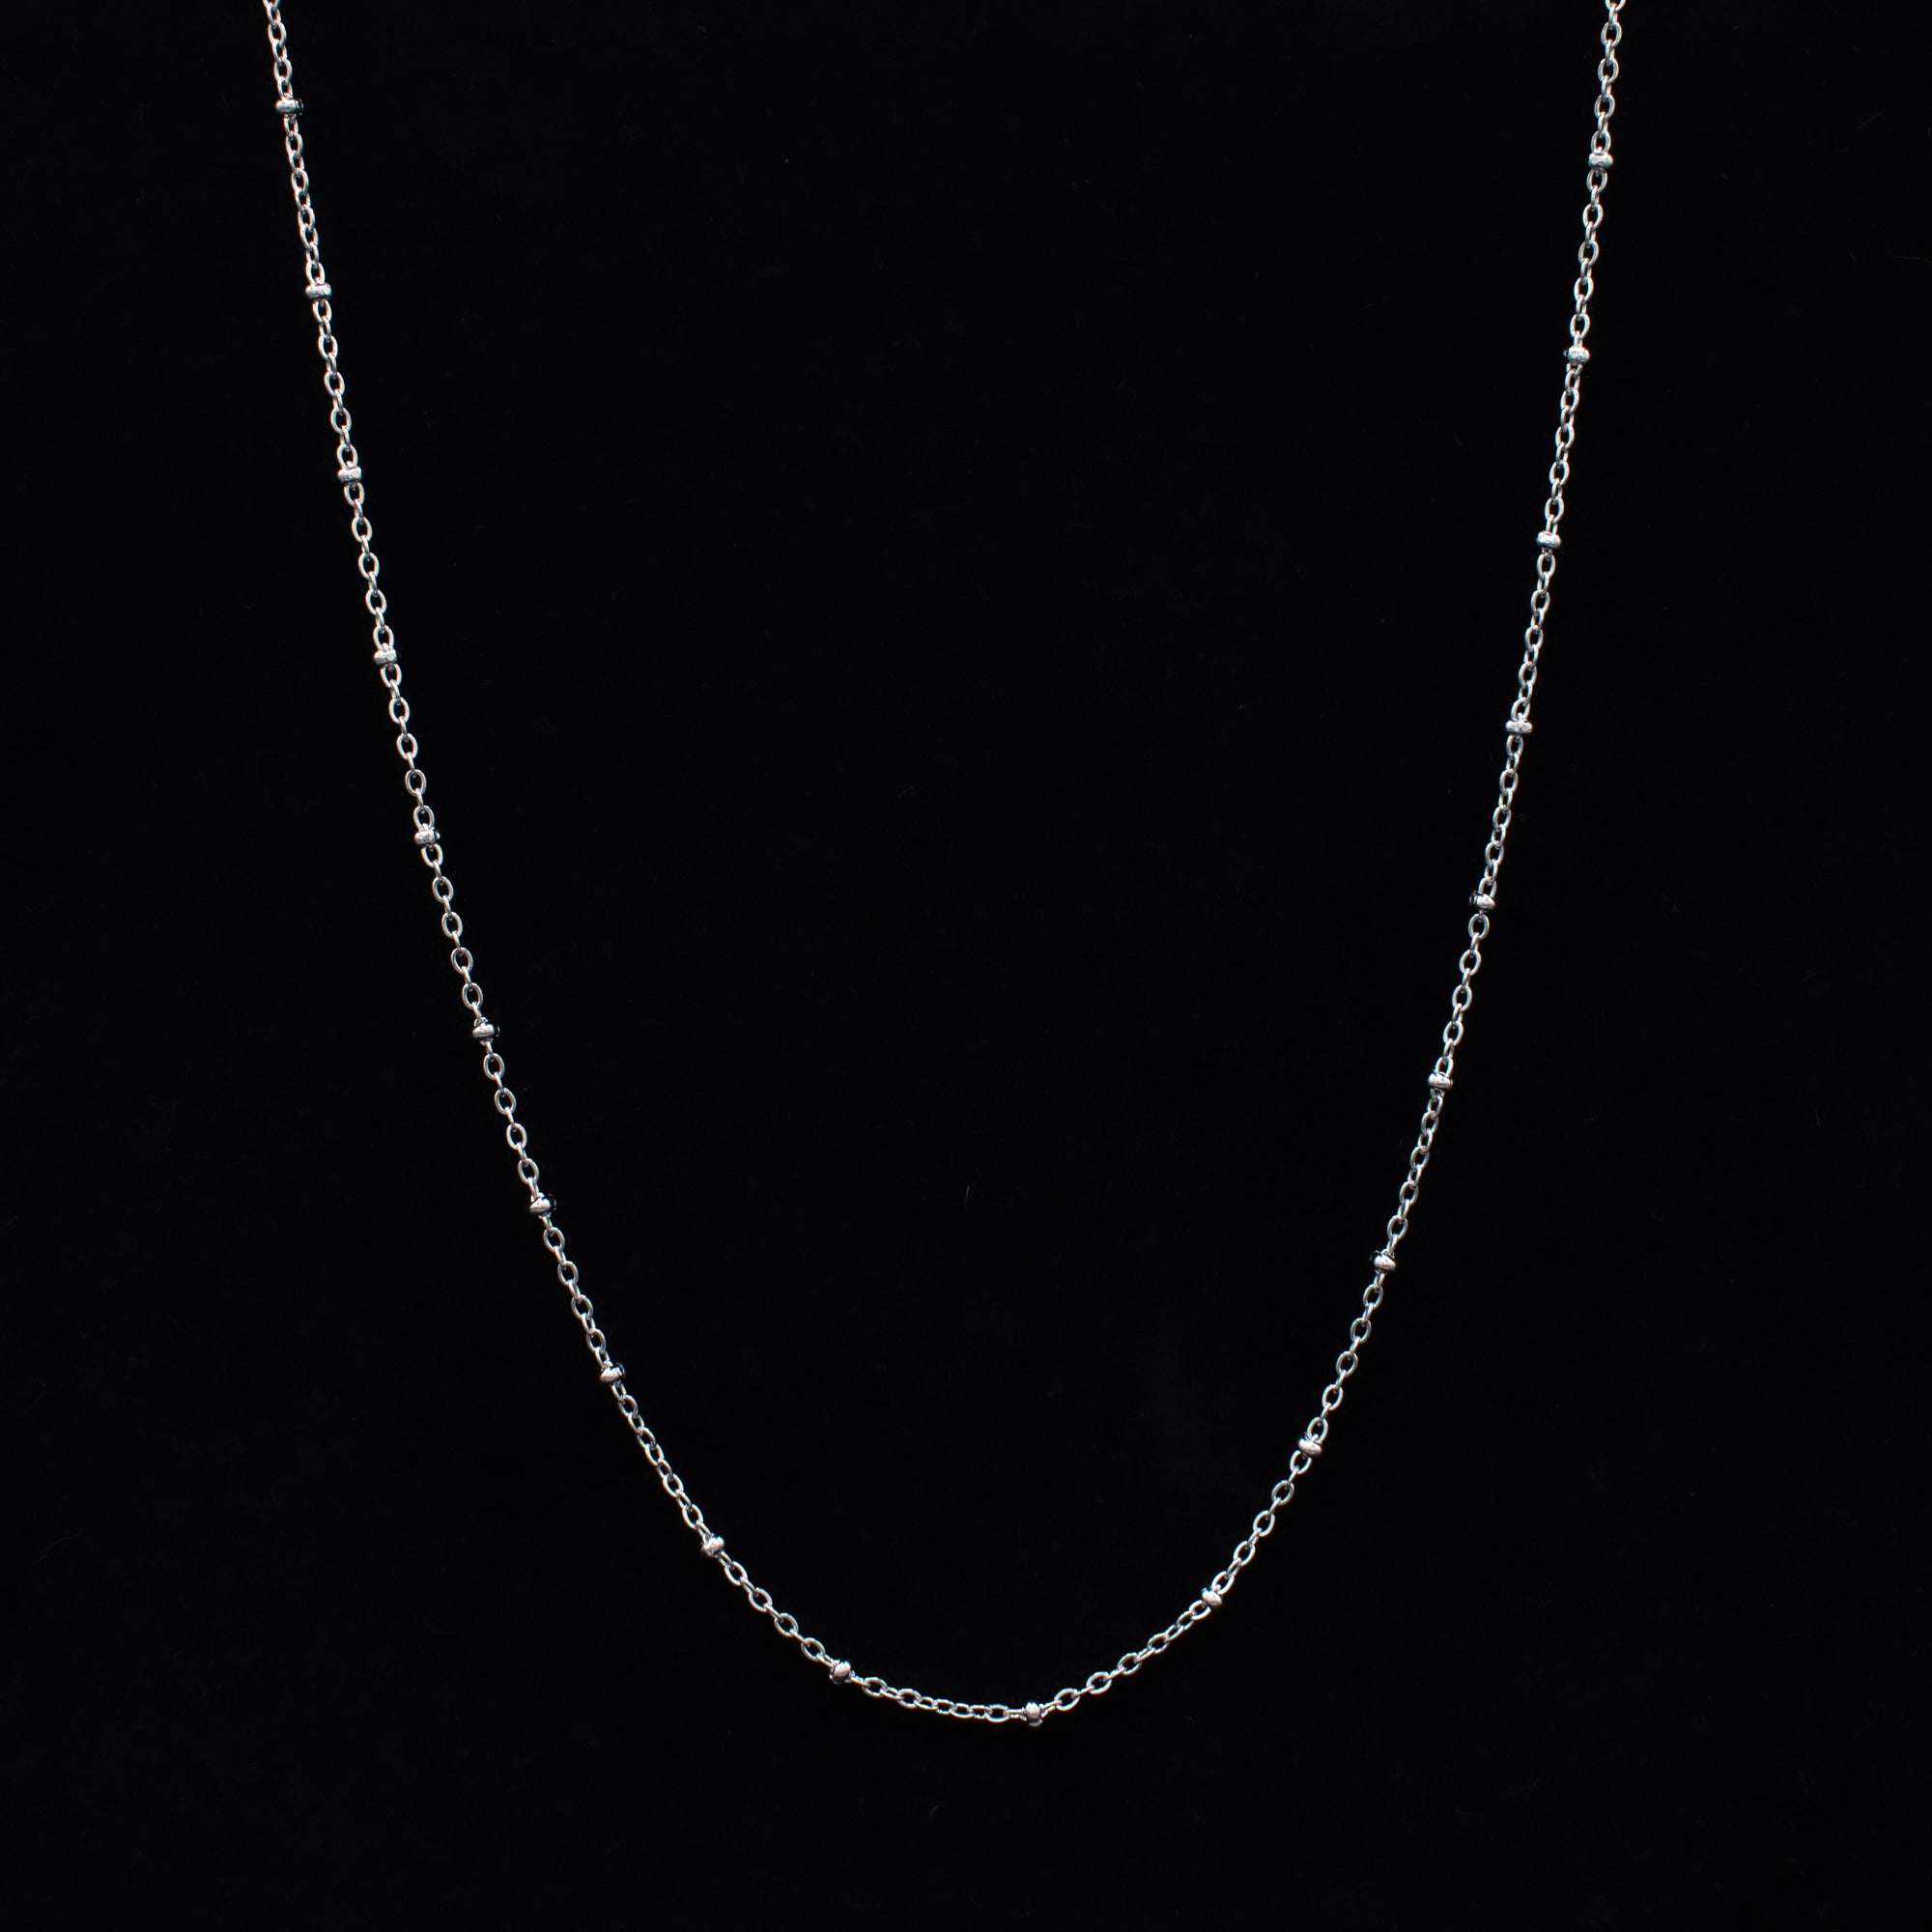 Satellite Cable Chain Necklace - (Silver) 2mm